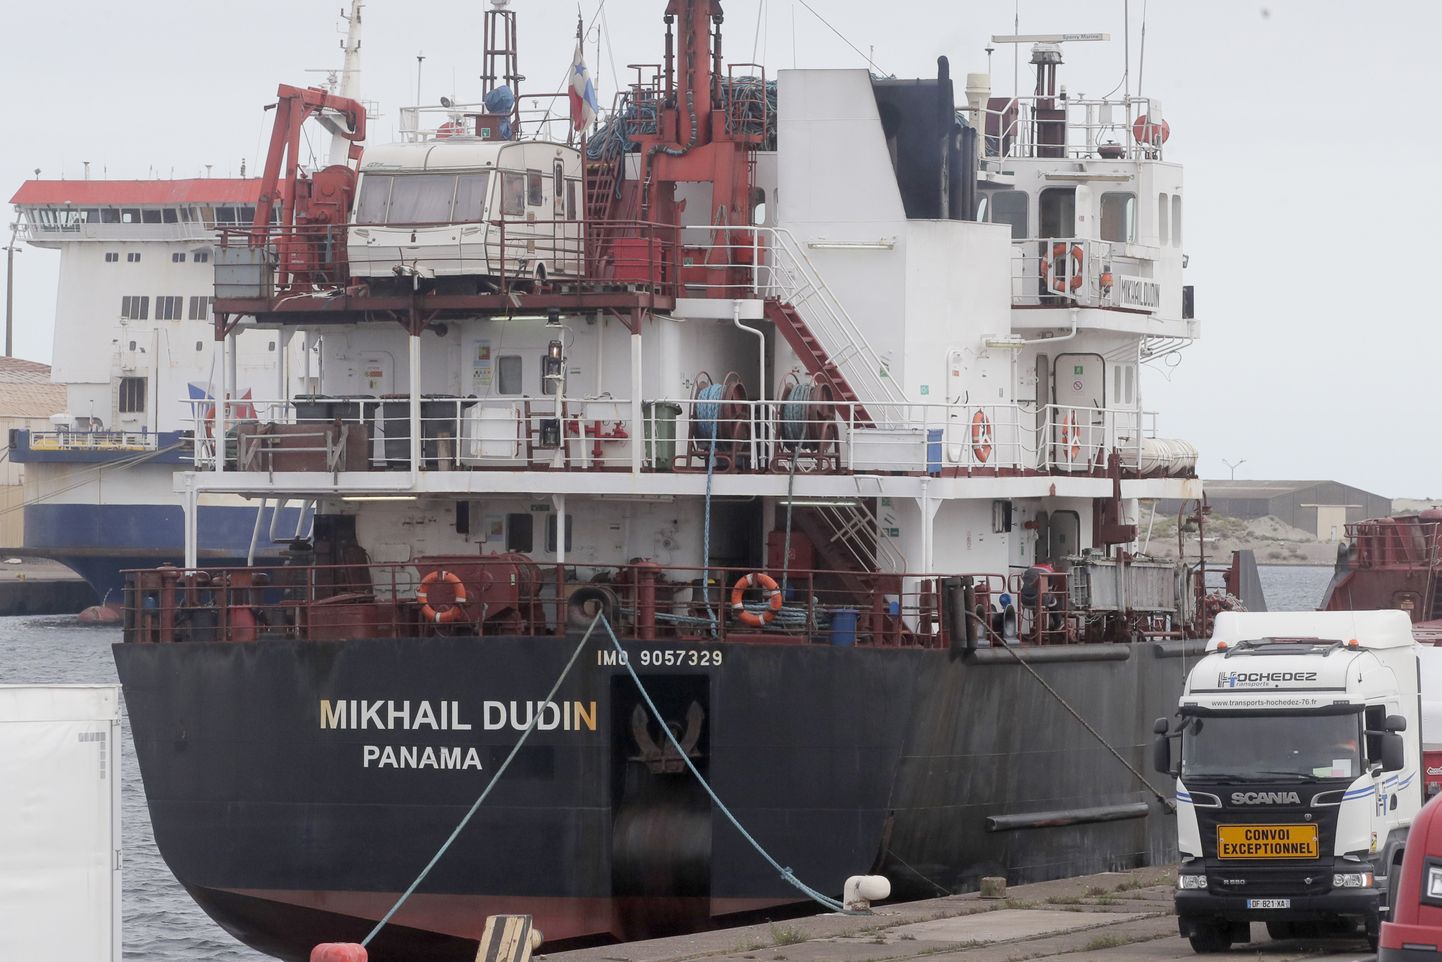 The Russian ship Mikhail Dudin in North-France. This ship visits also Russian ports of Baltic Sea.